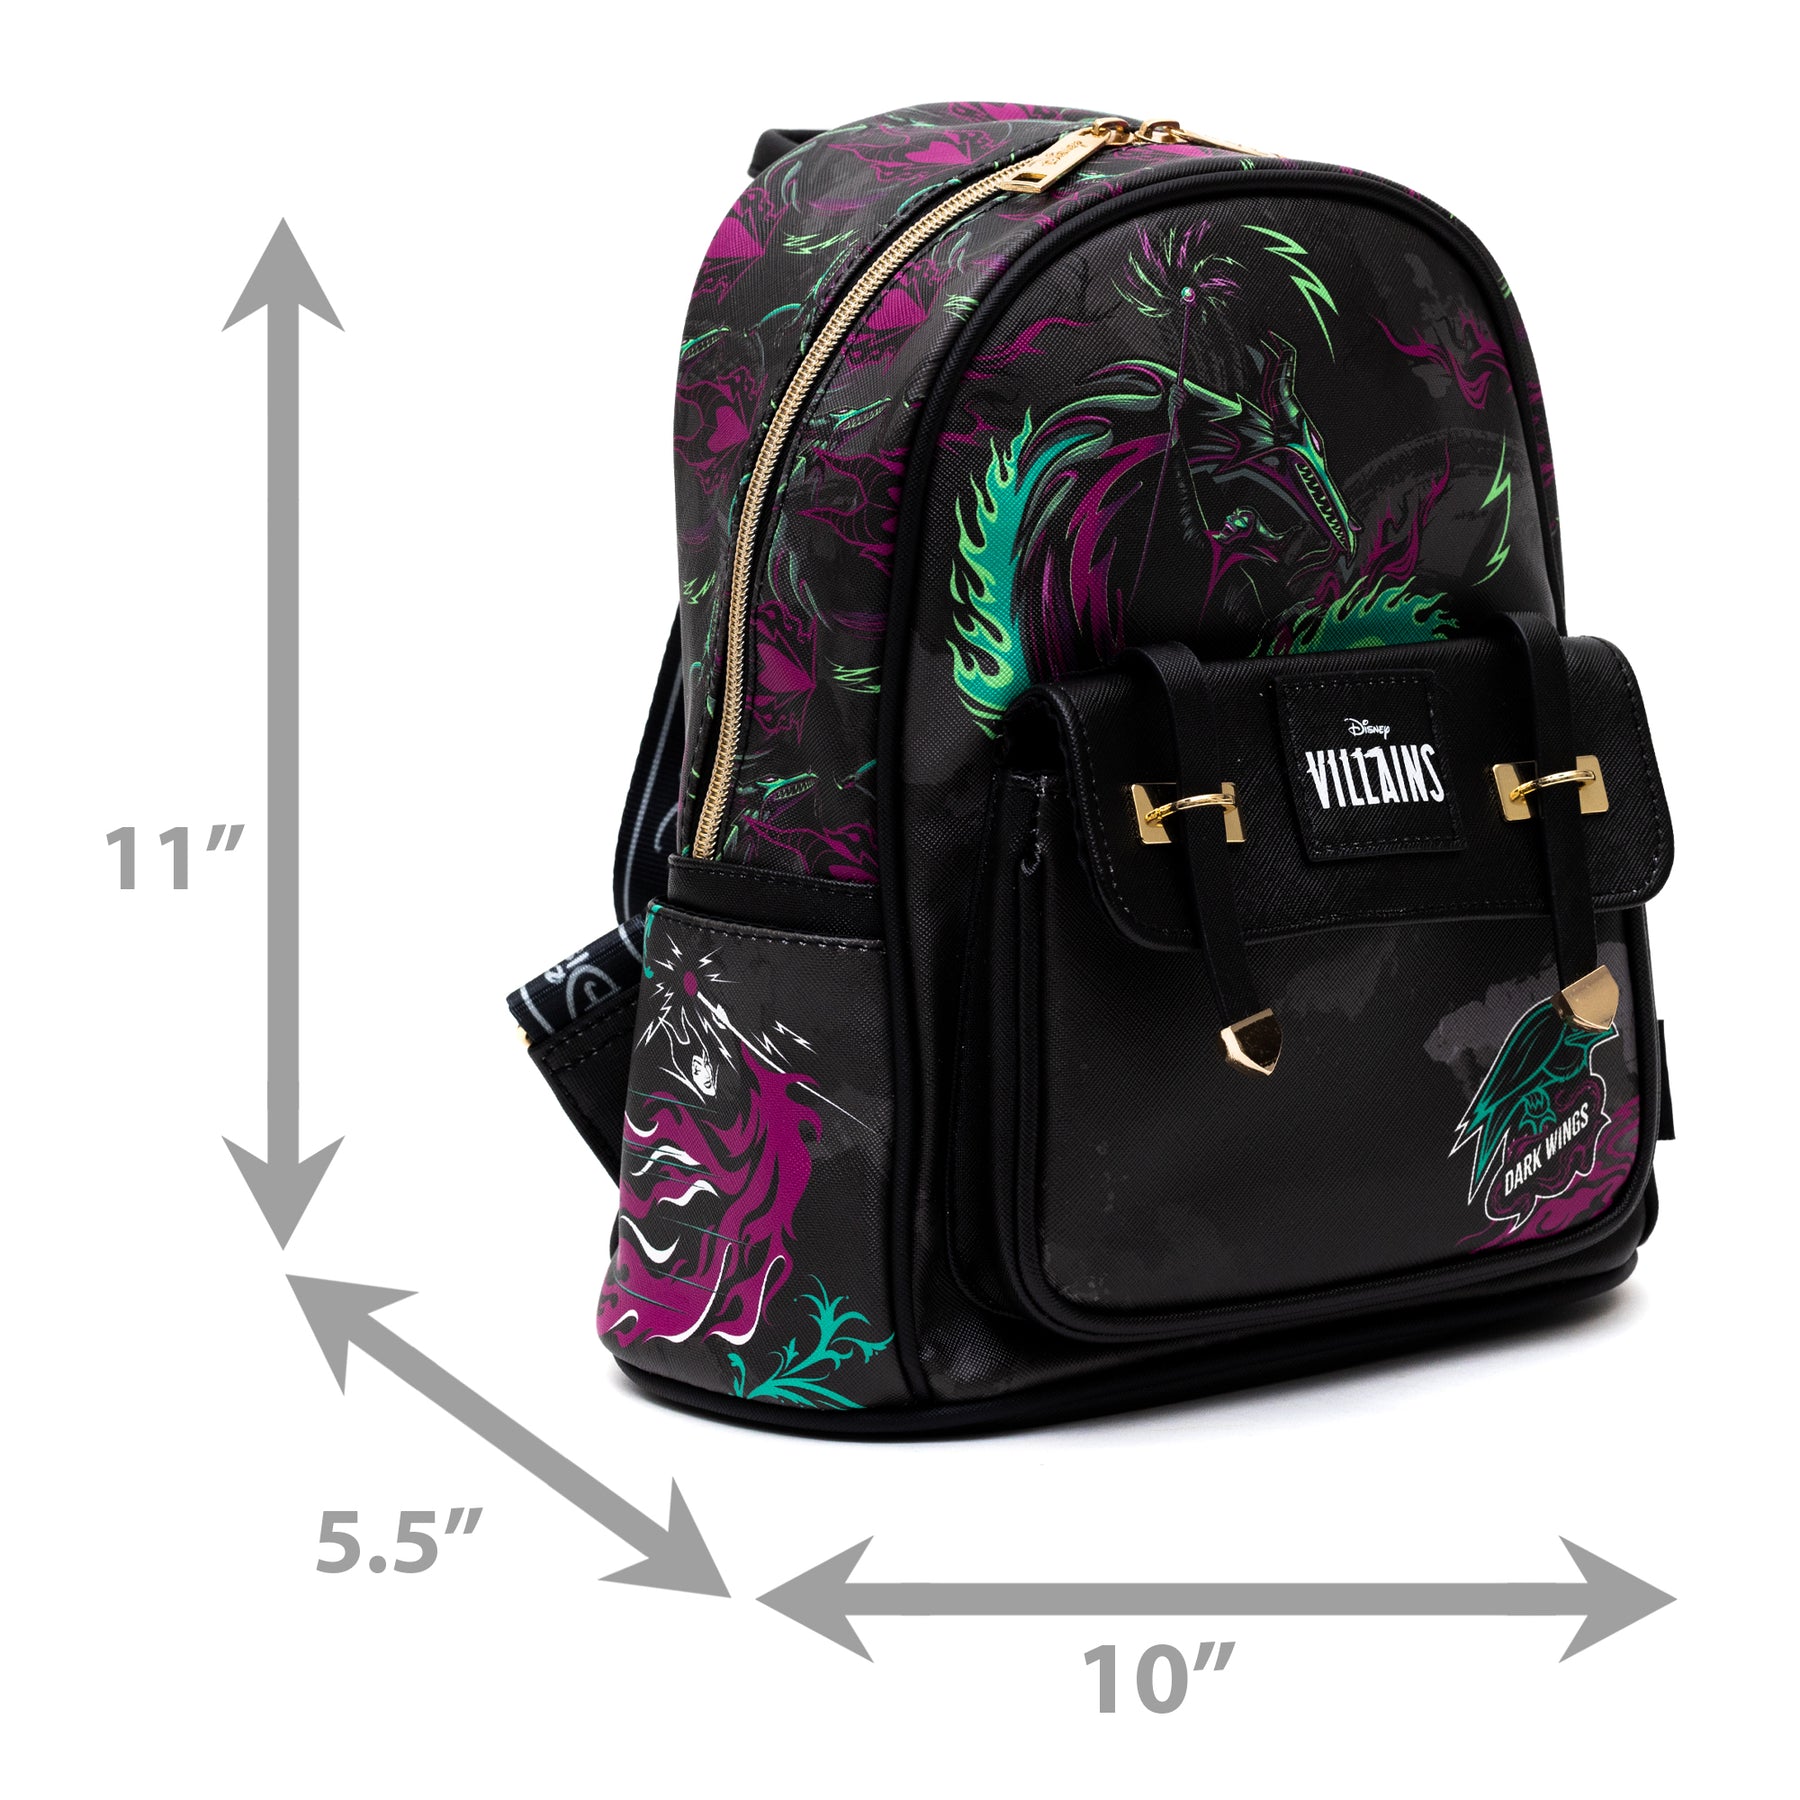 Disney Loungefly Limited Edition Maleficent Dragon Mini Backpack